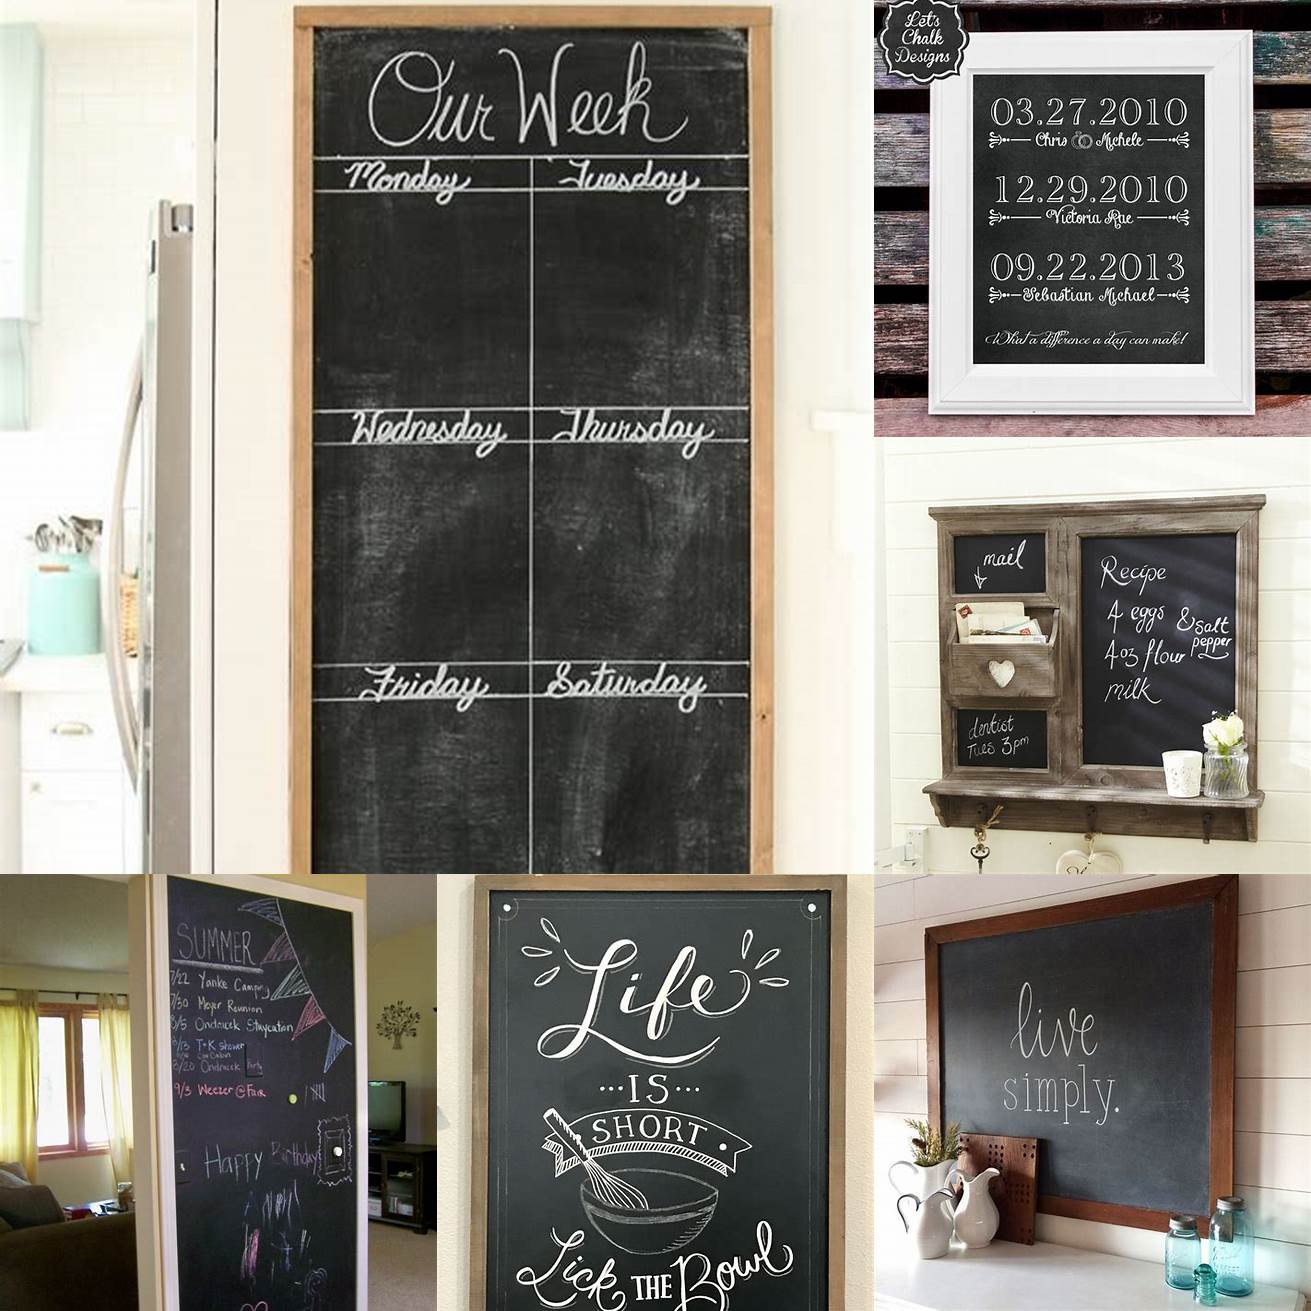 Use the kitchen chalkboard to keep track of important dates and events for the family Write down birthdays appointments and other events so that everyone is on the same page